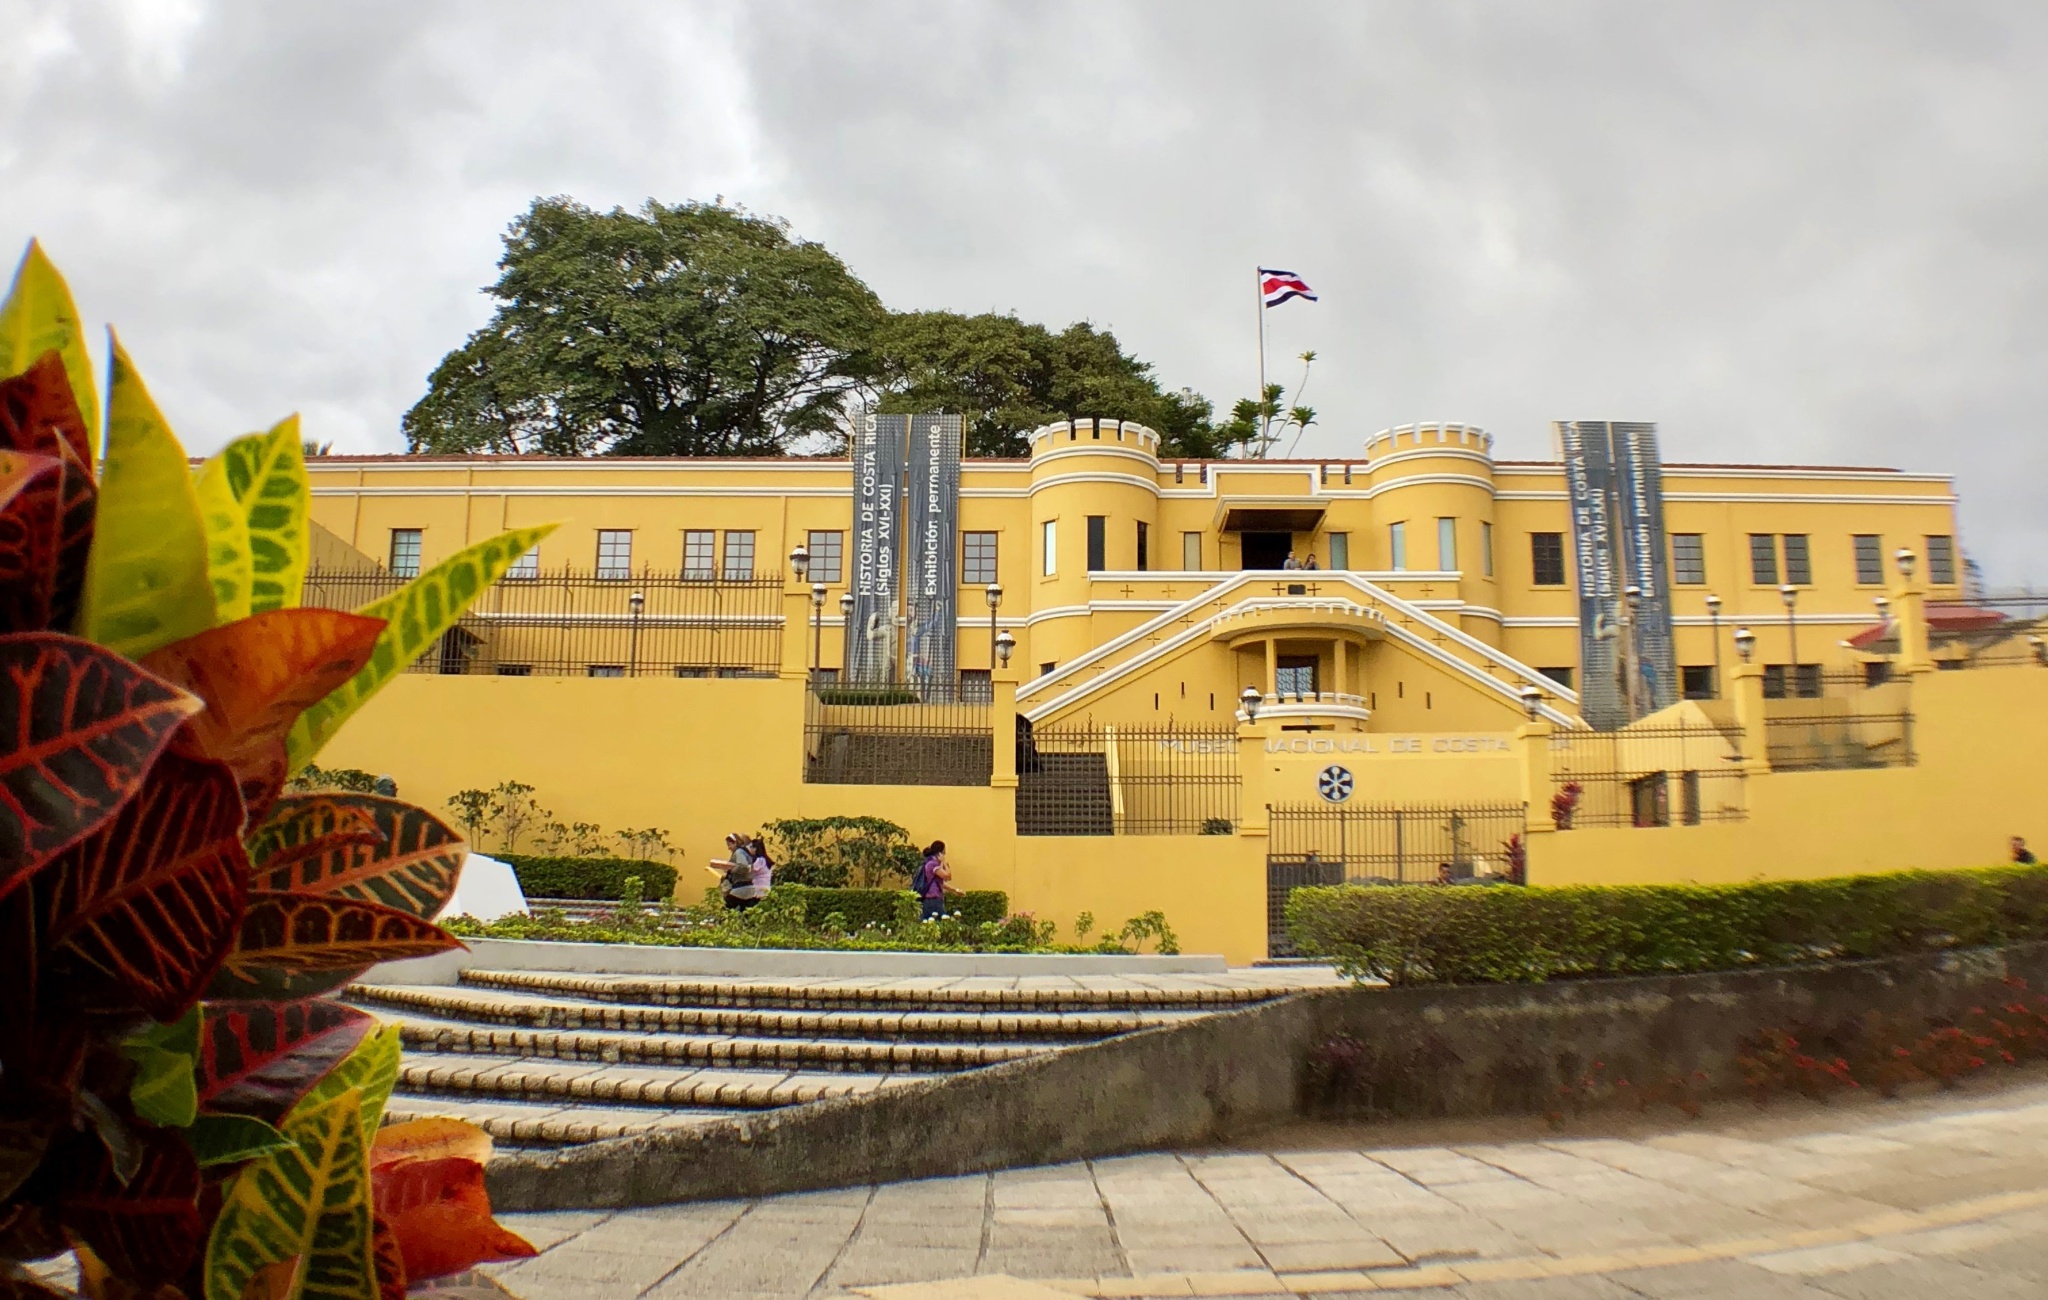 National Museum of Costa Rica